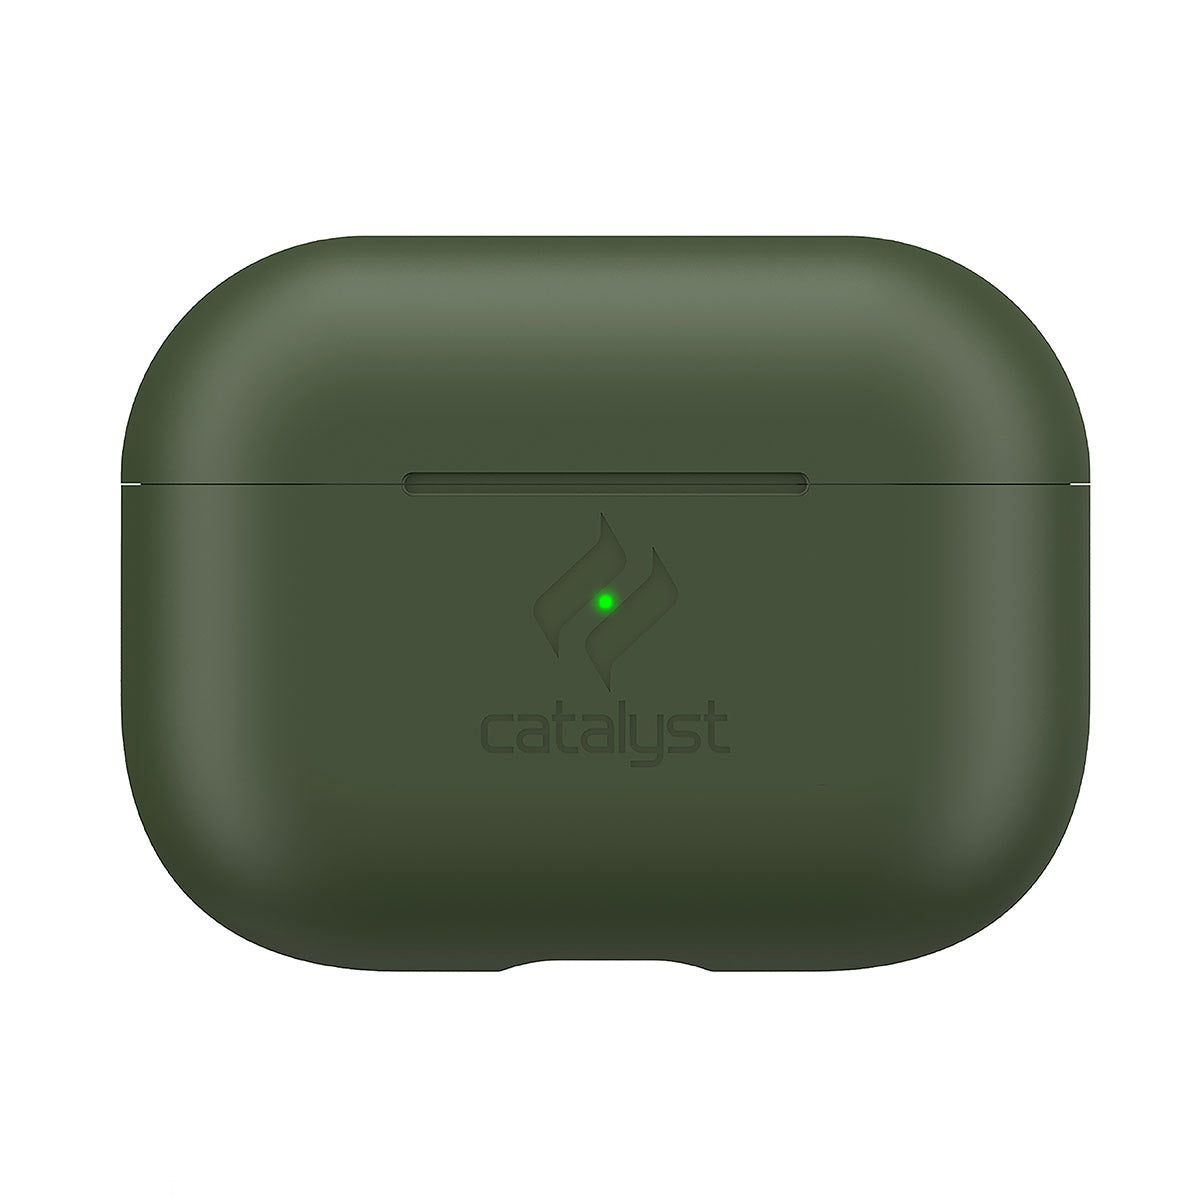 Catalyst airpods pro gen 2/1 slim case showing front view of the case in army green colorway